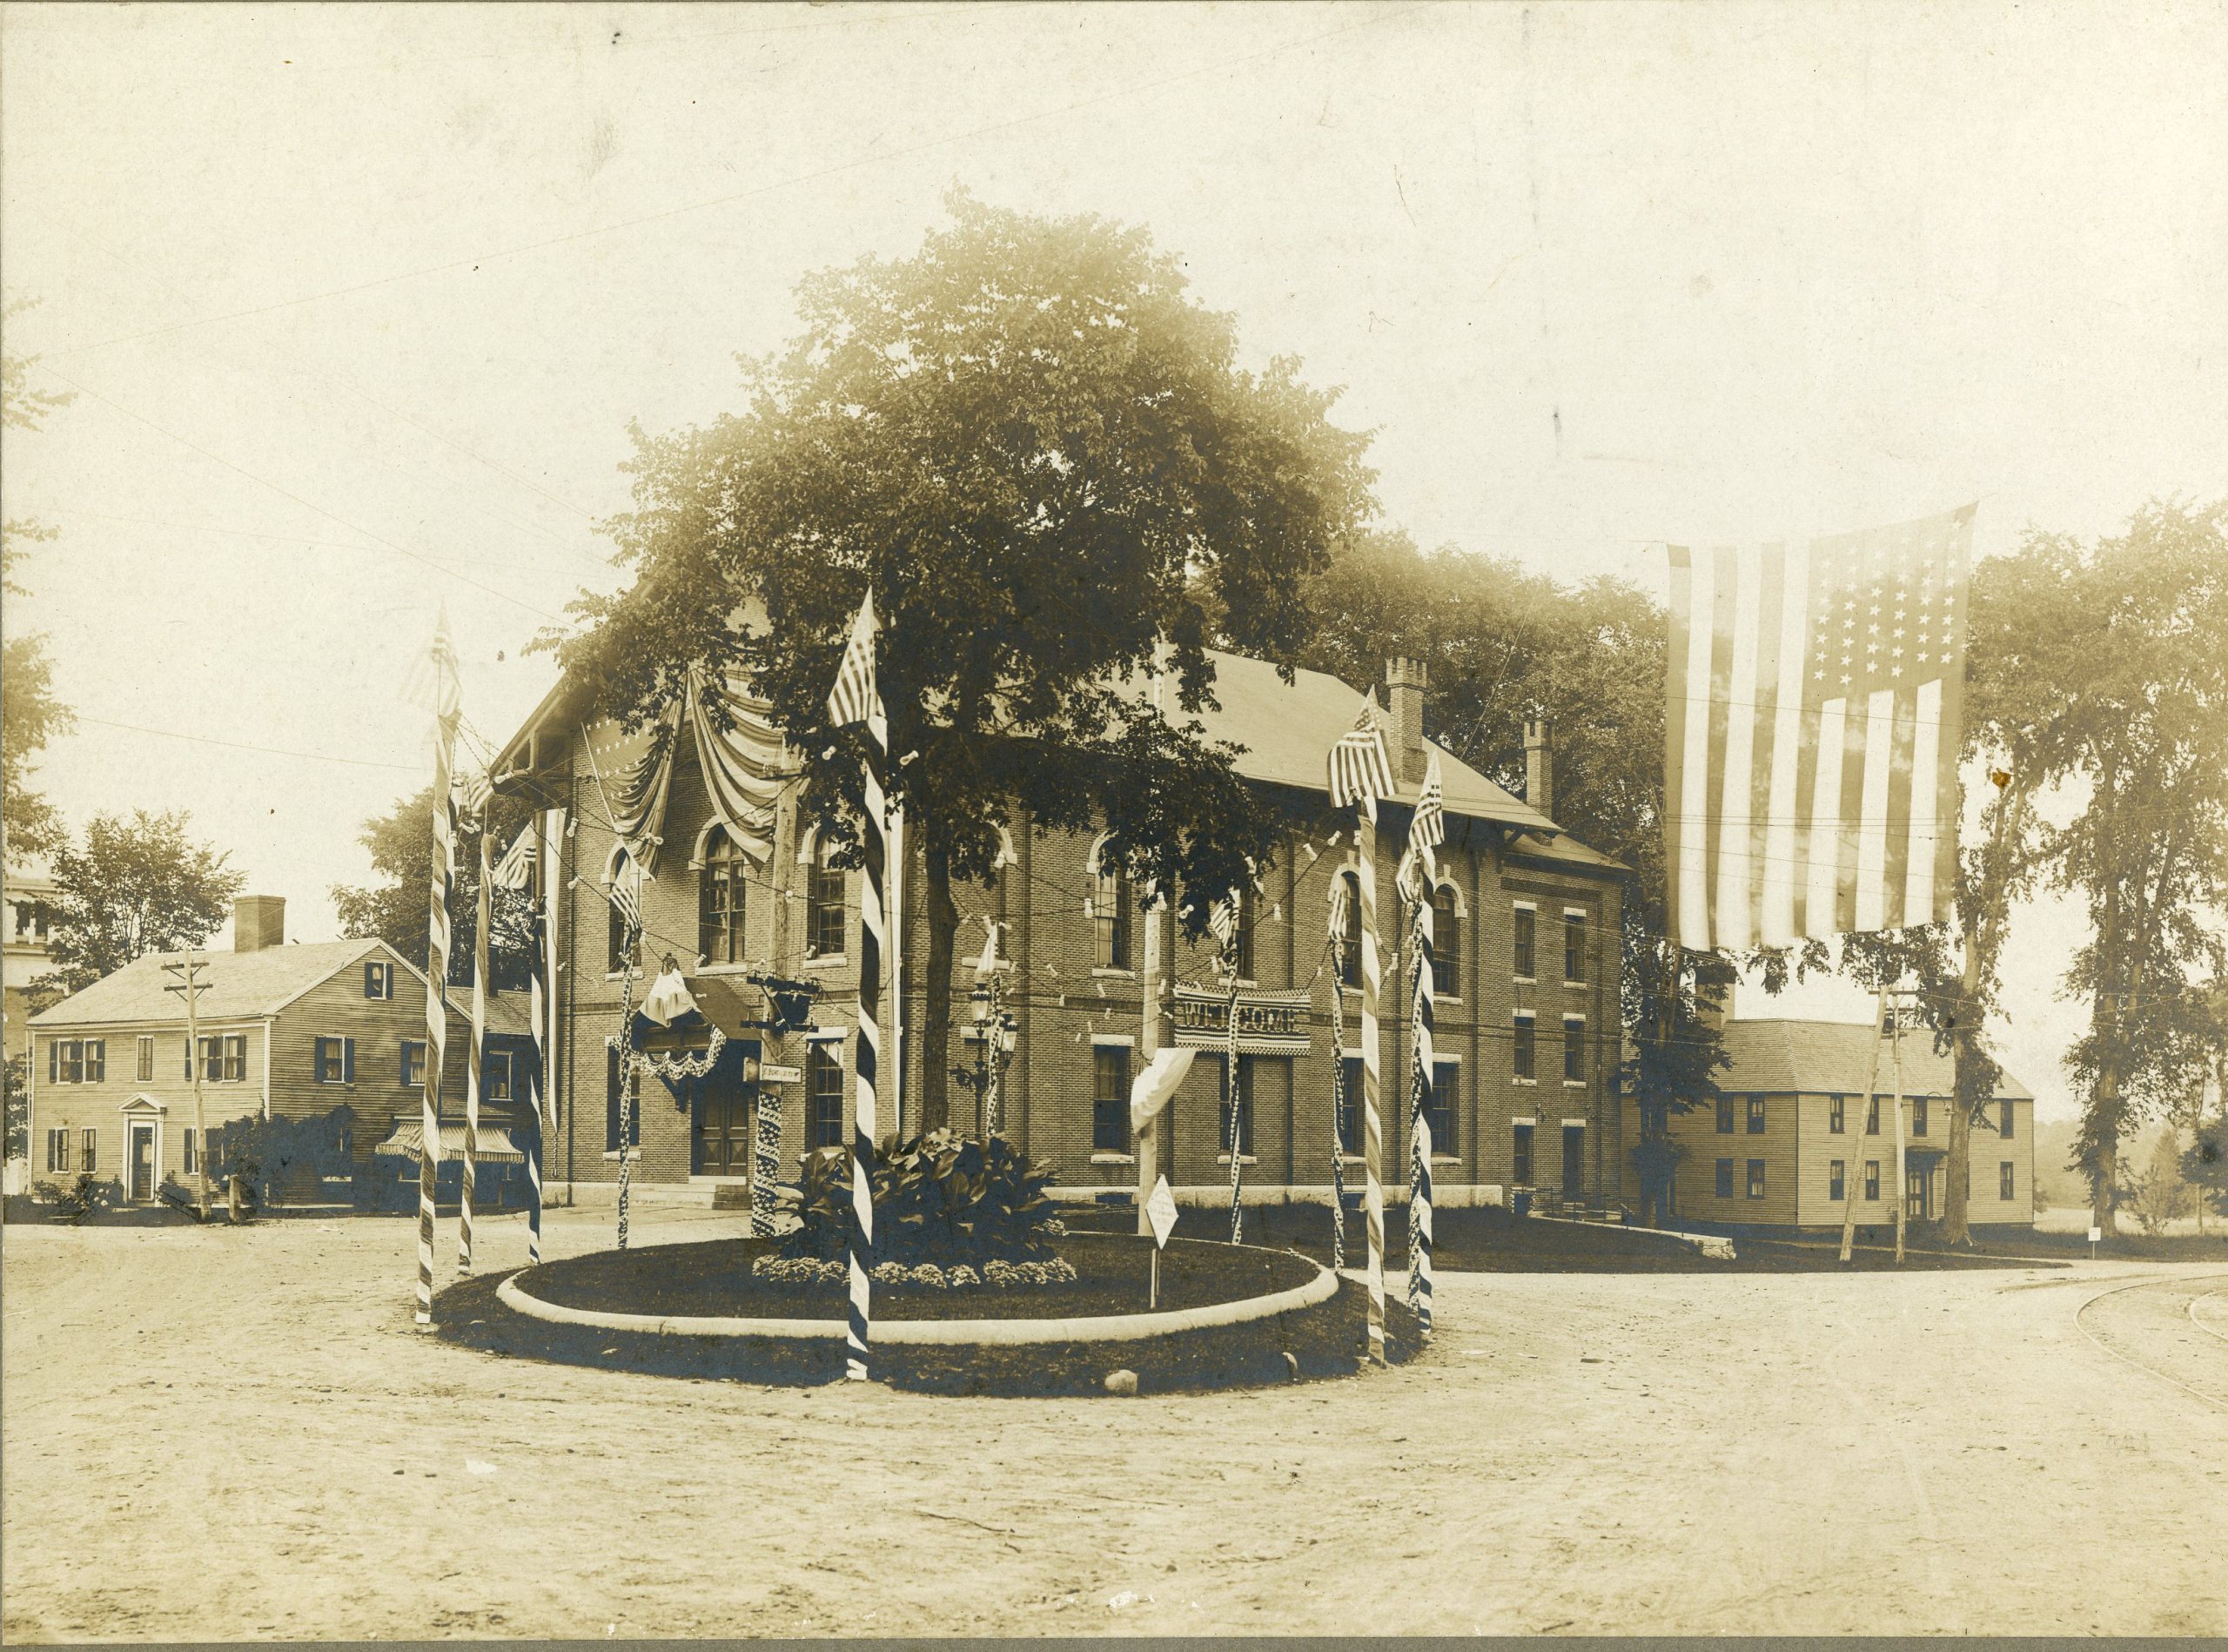 The Kennebunk Town Hall decorated for Old Home Week, 1907